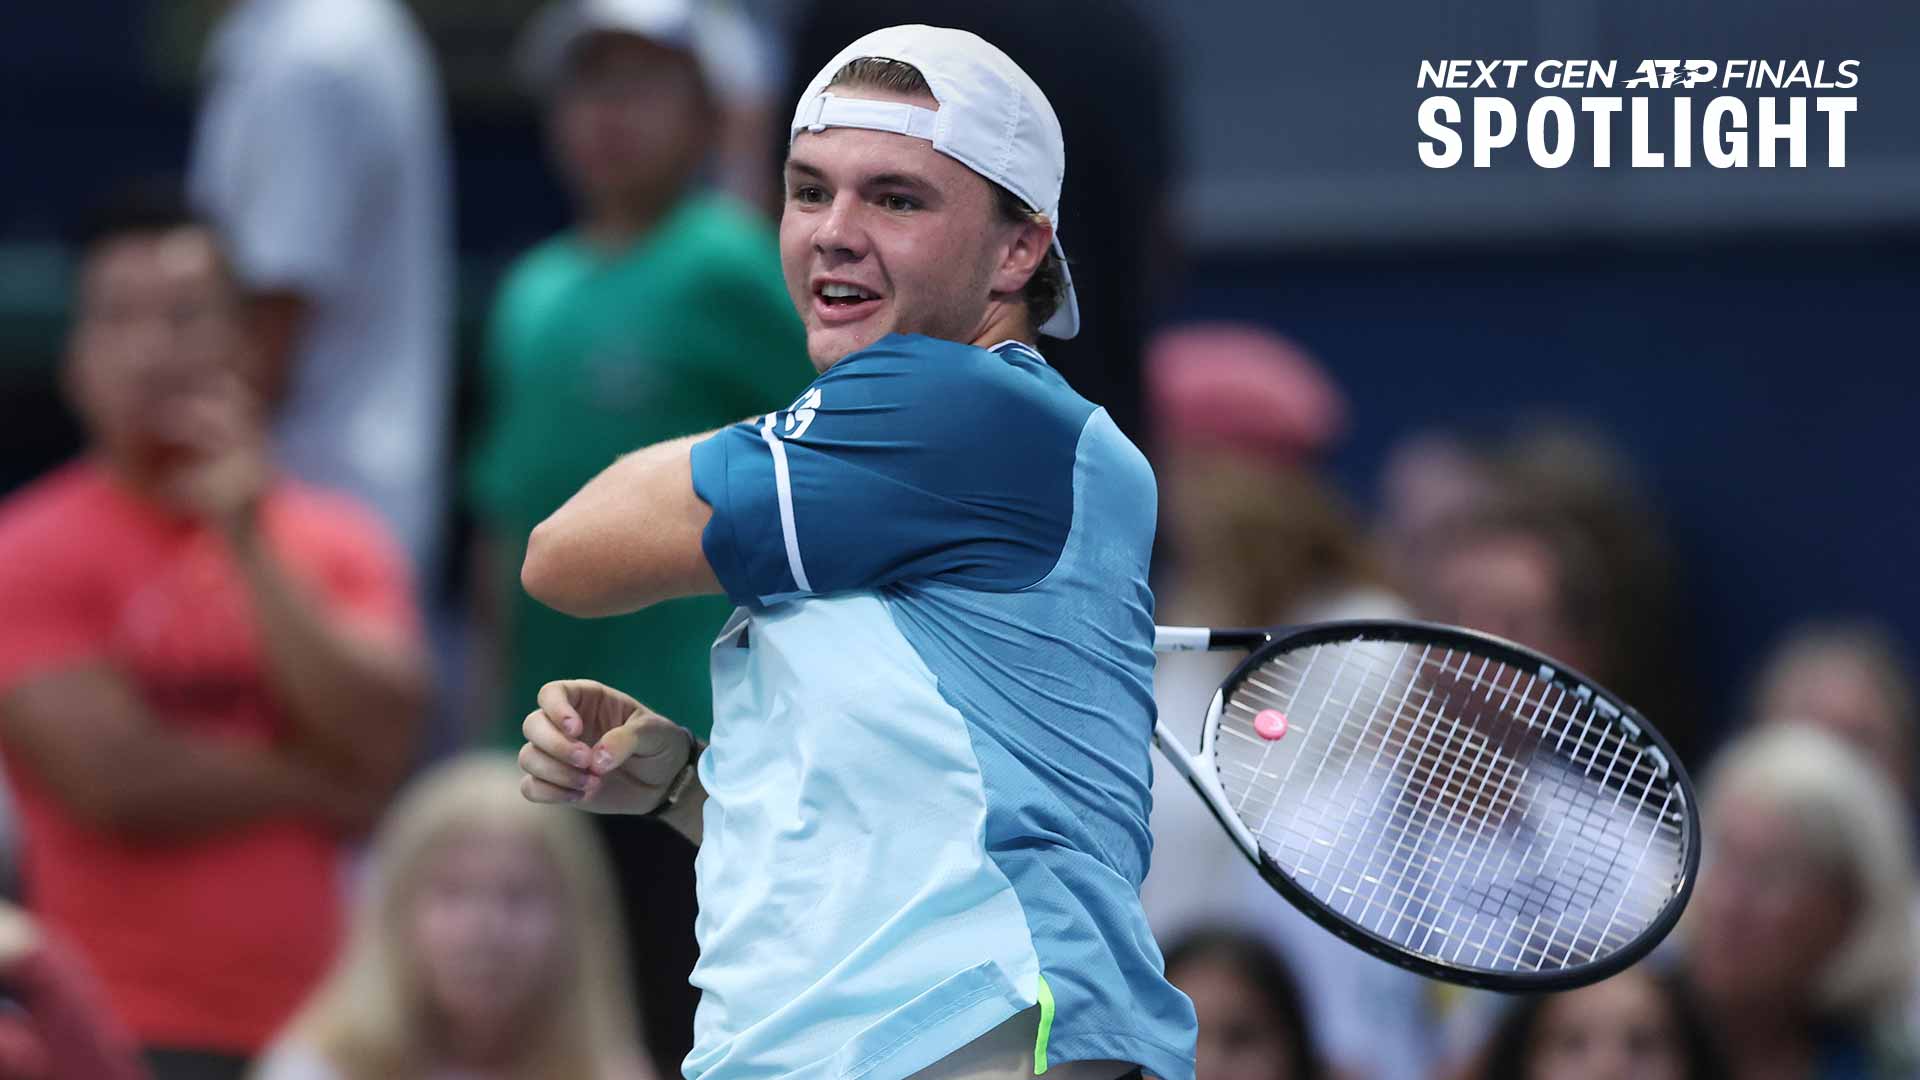 Dominic Stricker is competing in the US Open main draw for the first time.